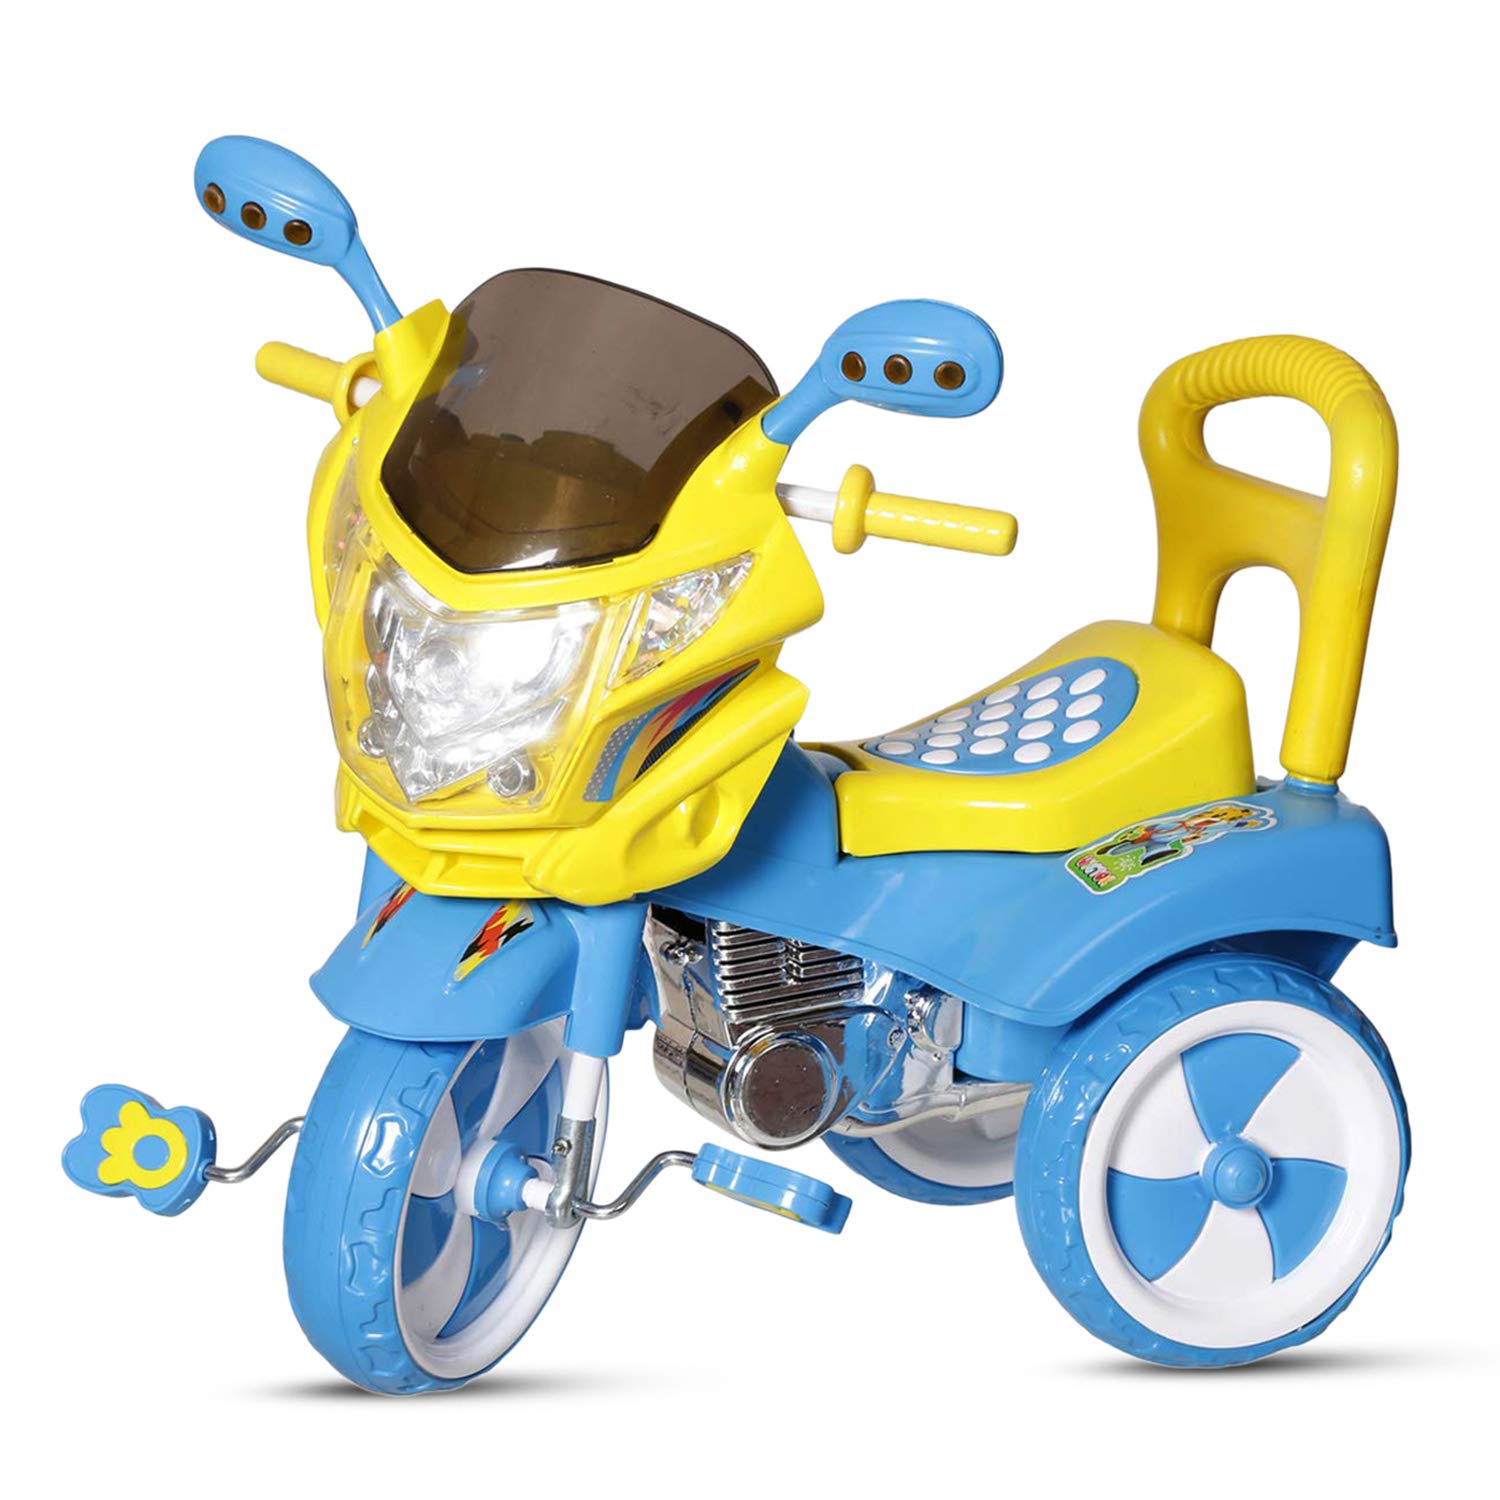 Safe and Stylish Kids' Tricycle Designs